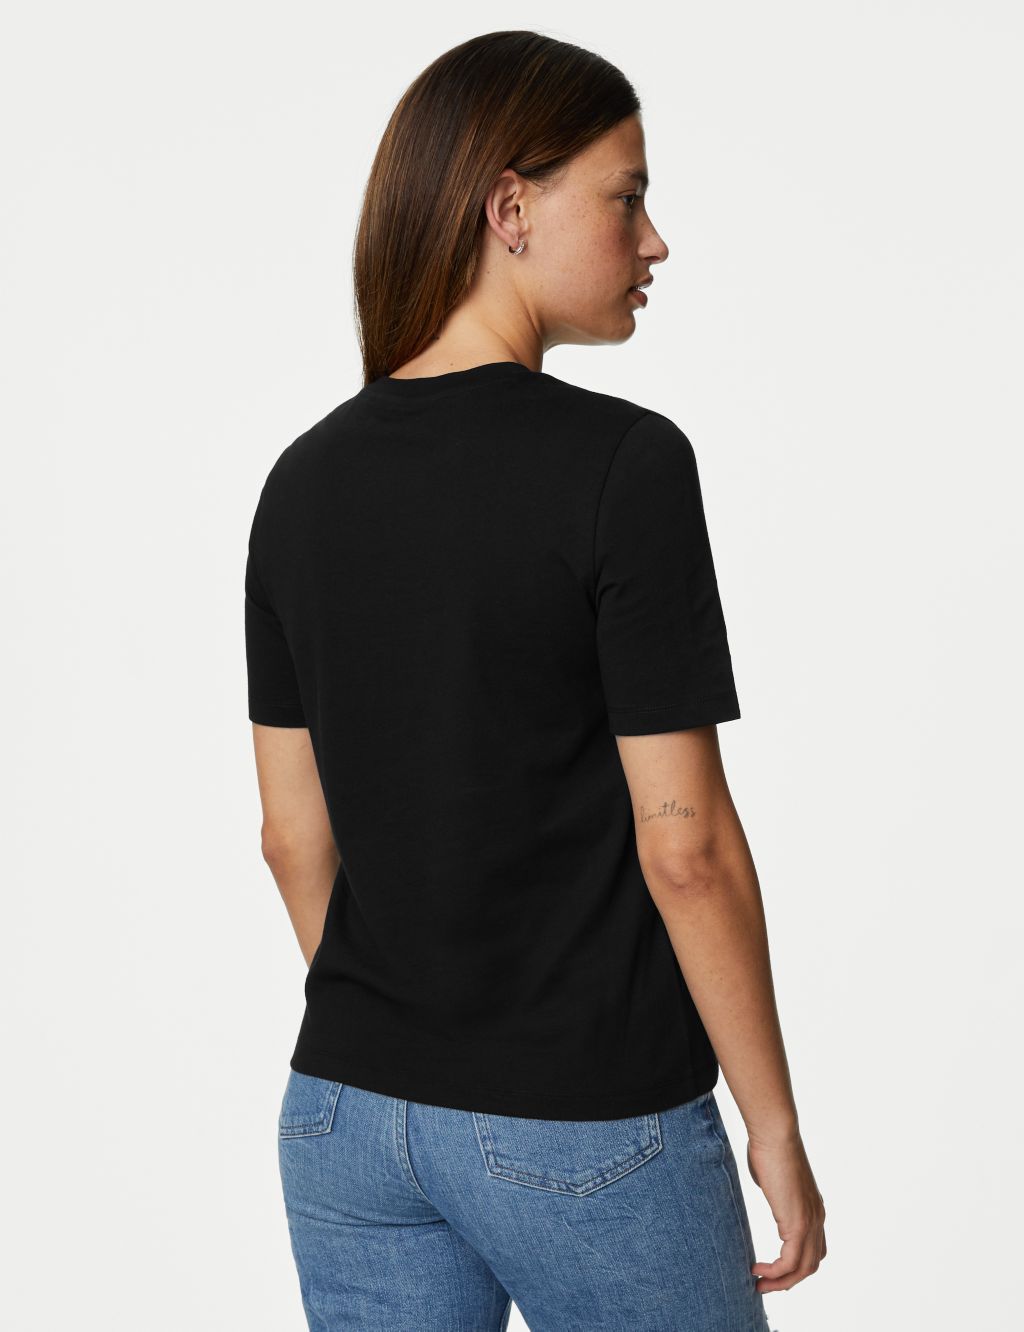 Pure Cotton Everyday Fit T-Shirt image 5